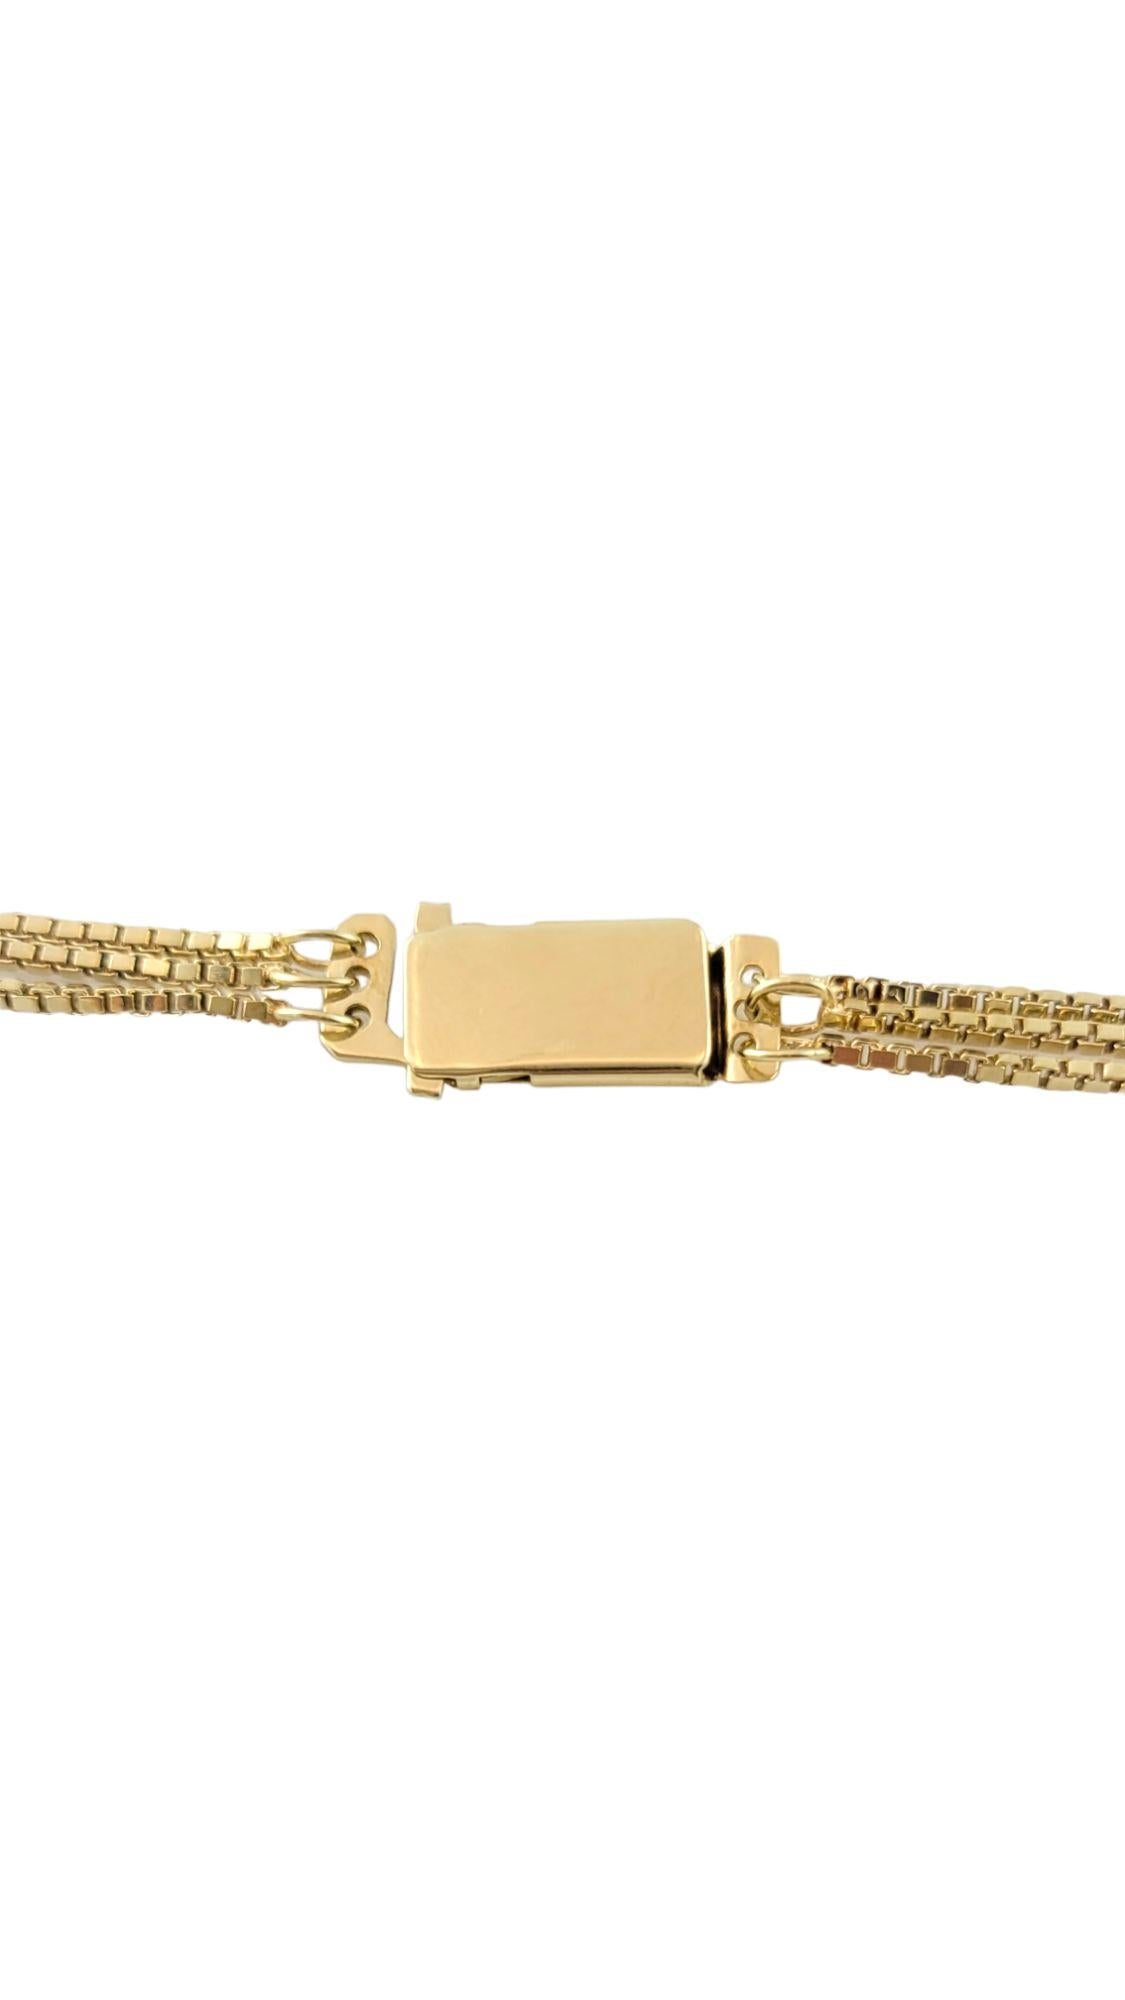 Vintage 14K Yellow Gold Triple Strand Box Chain Necklace

This gorgeous 14K gold necklace features 3 strands of box chains for a gorgeous final look!

Length: 17.5